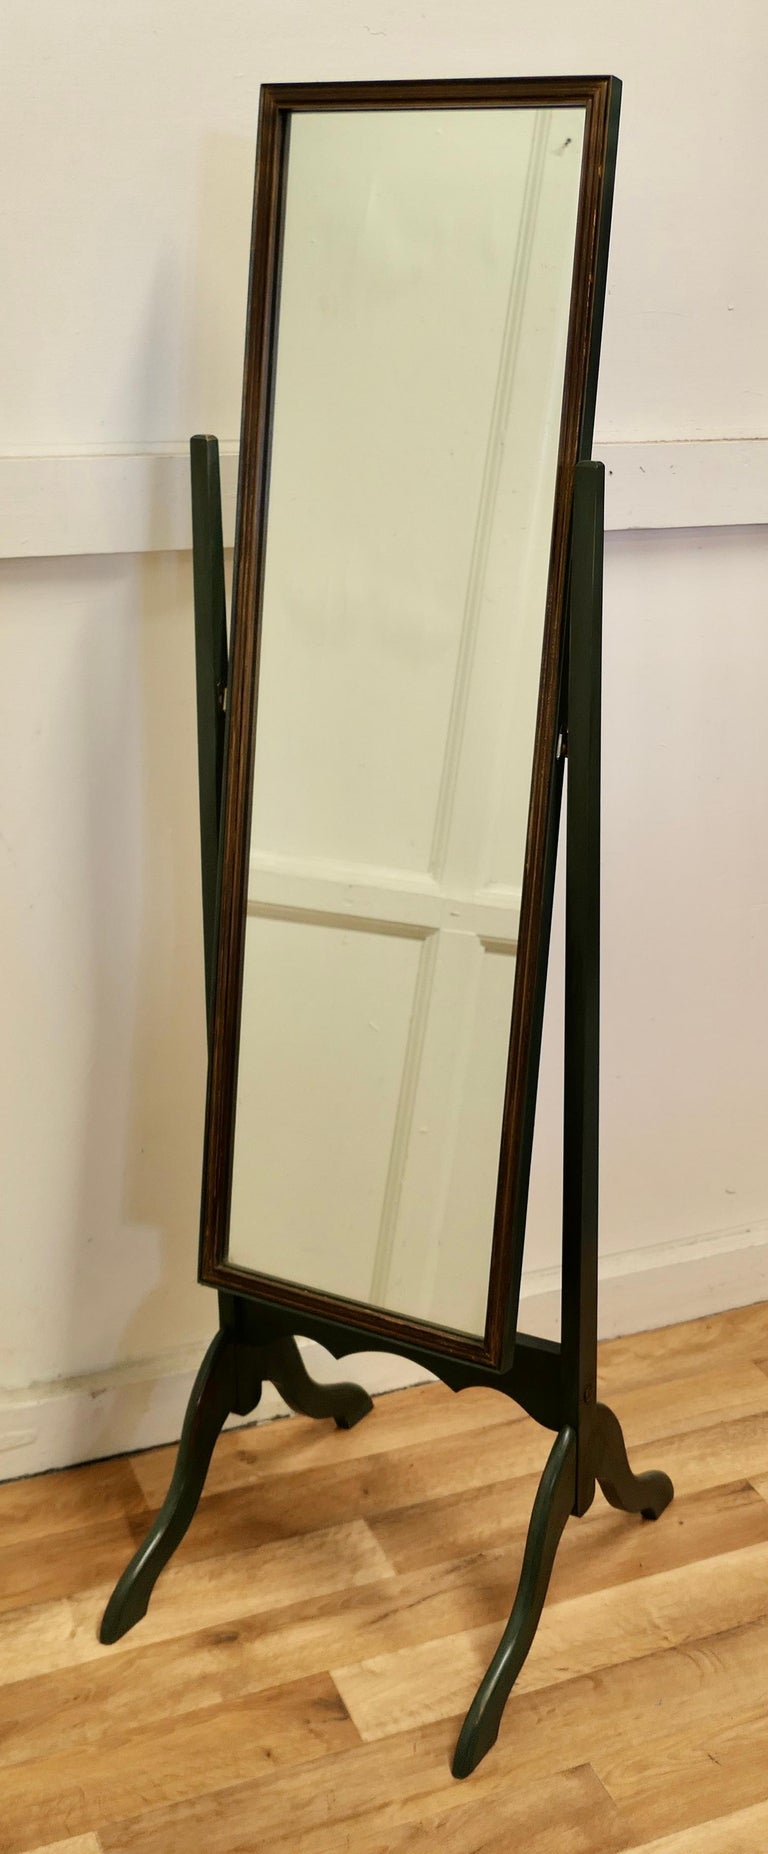 Adams Art Deco green painted cheval mirror

The Mirror is in dark green with a gilt frame, it has a good rectangular shape, it sits firmly in its stand and swivels for maximum advantage
The Stand has a sleek shape with slightly arching splayed